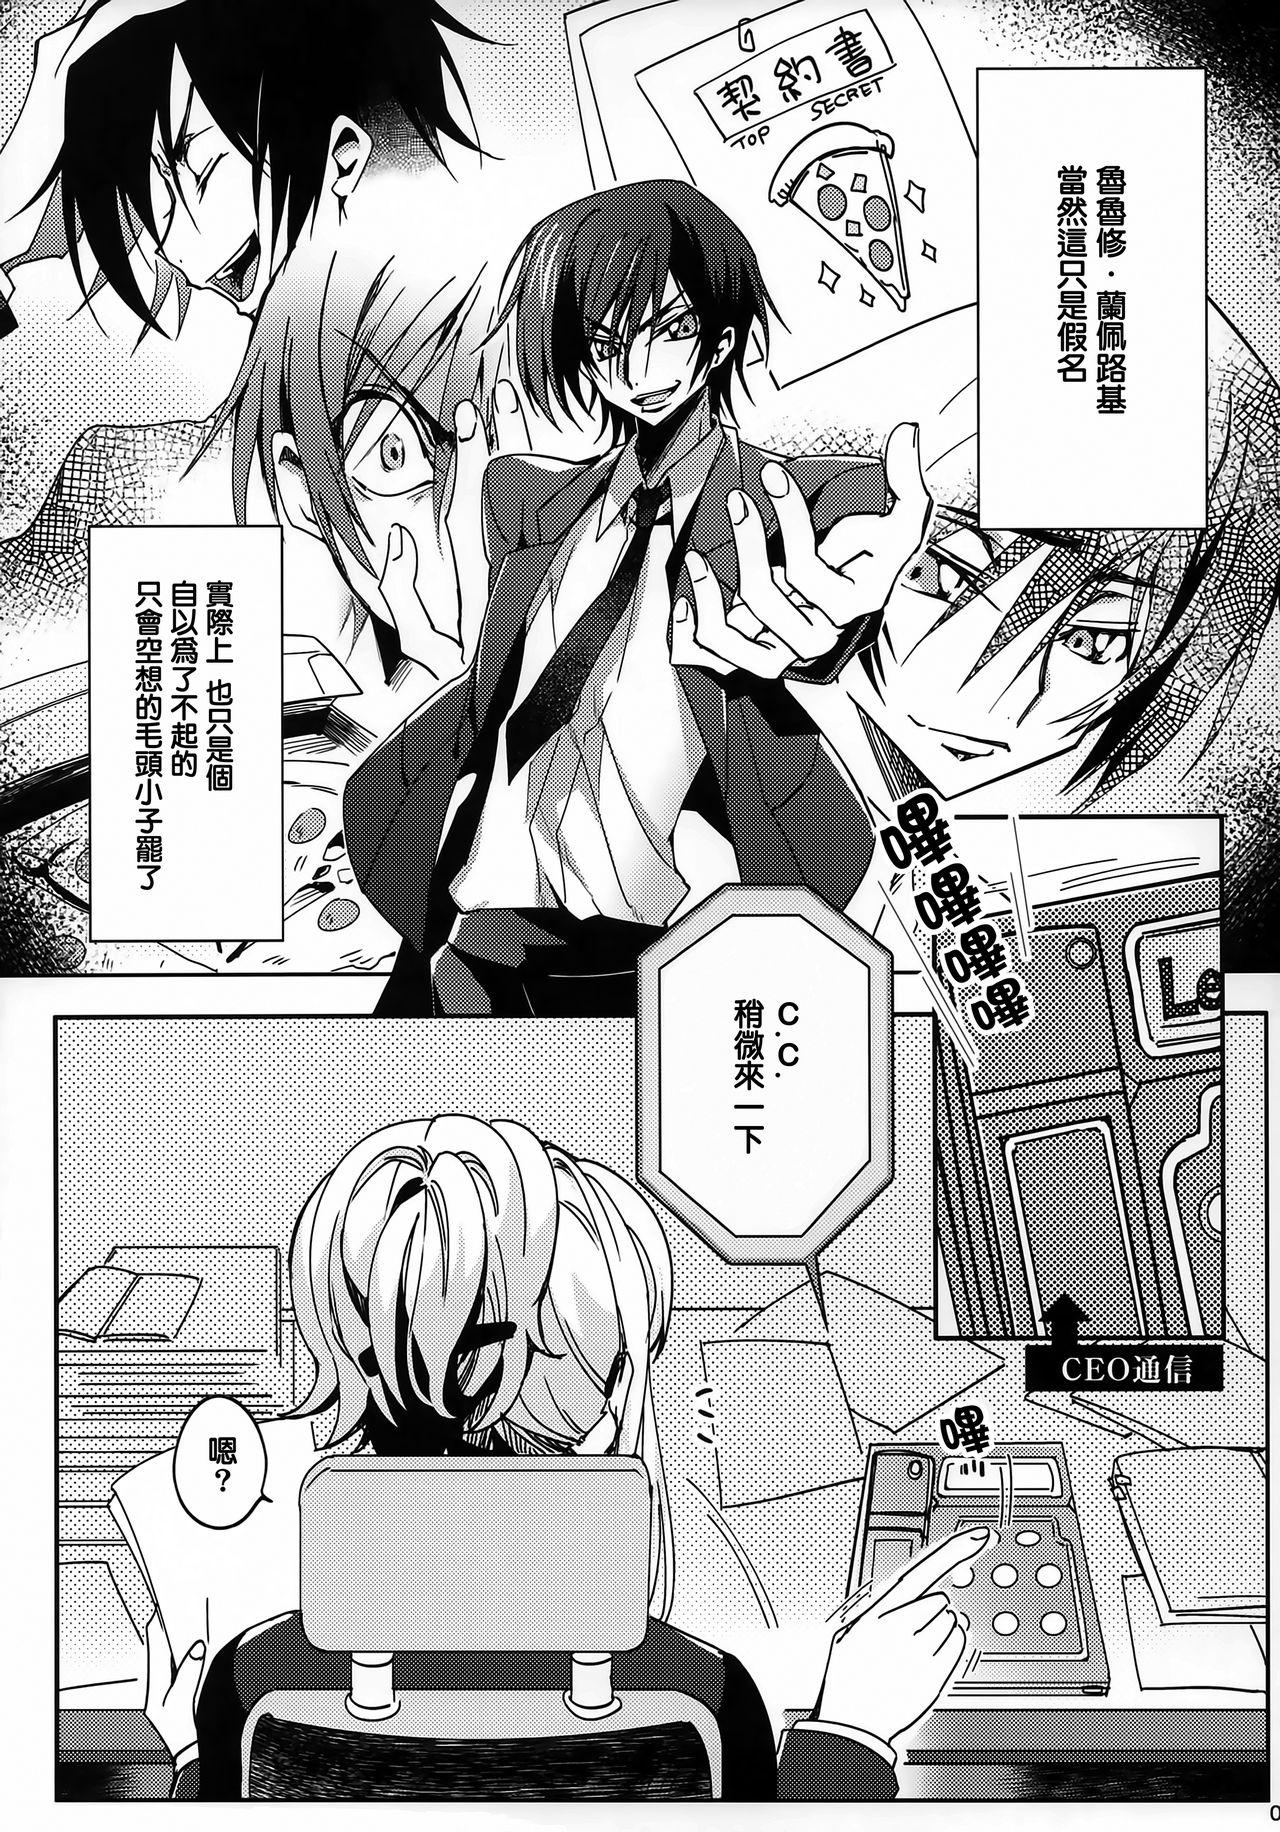 Gays Office Noise - Code geass 19yo - Page 5